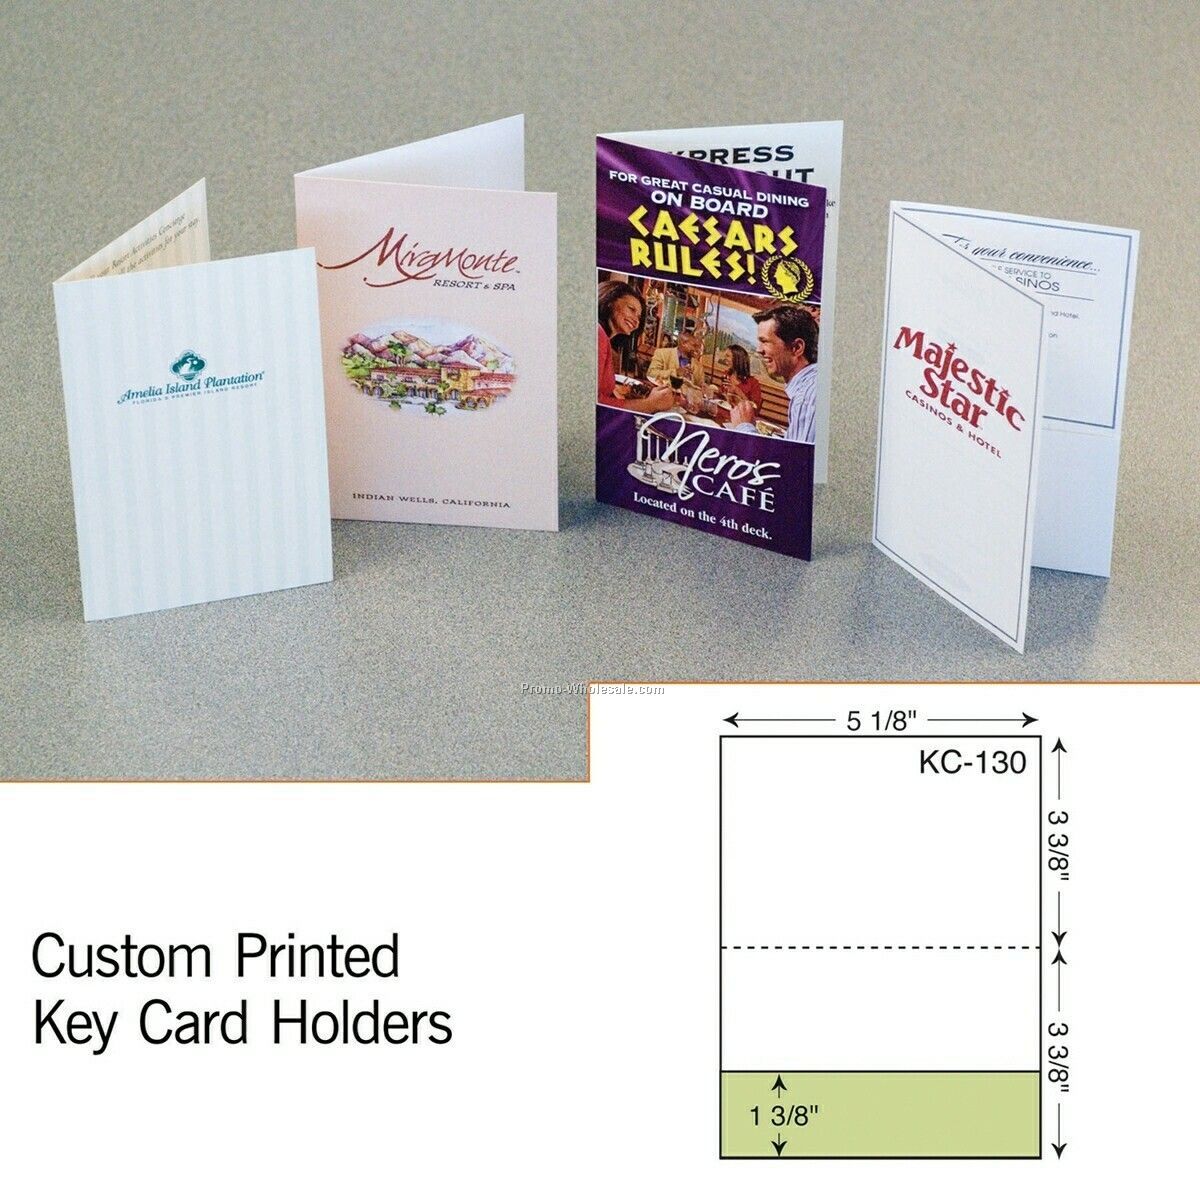 3-3/4"x2-3/4" Key Card W/ Curved Right Pocket (4 Color Process)